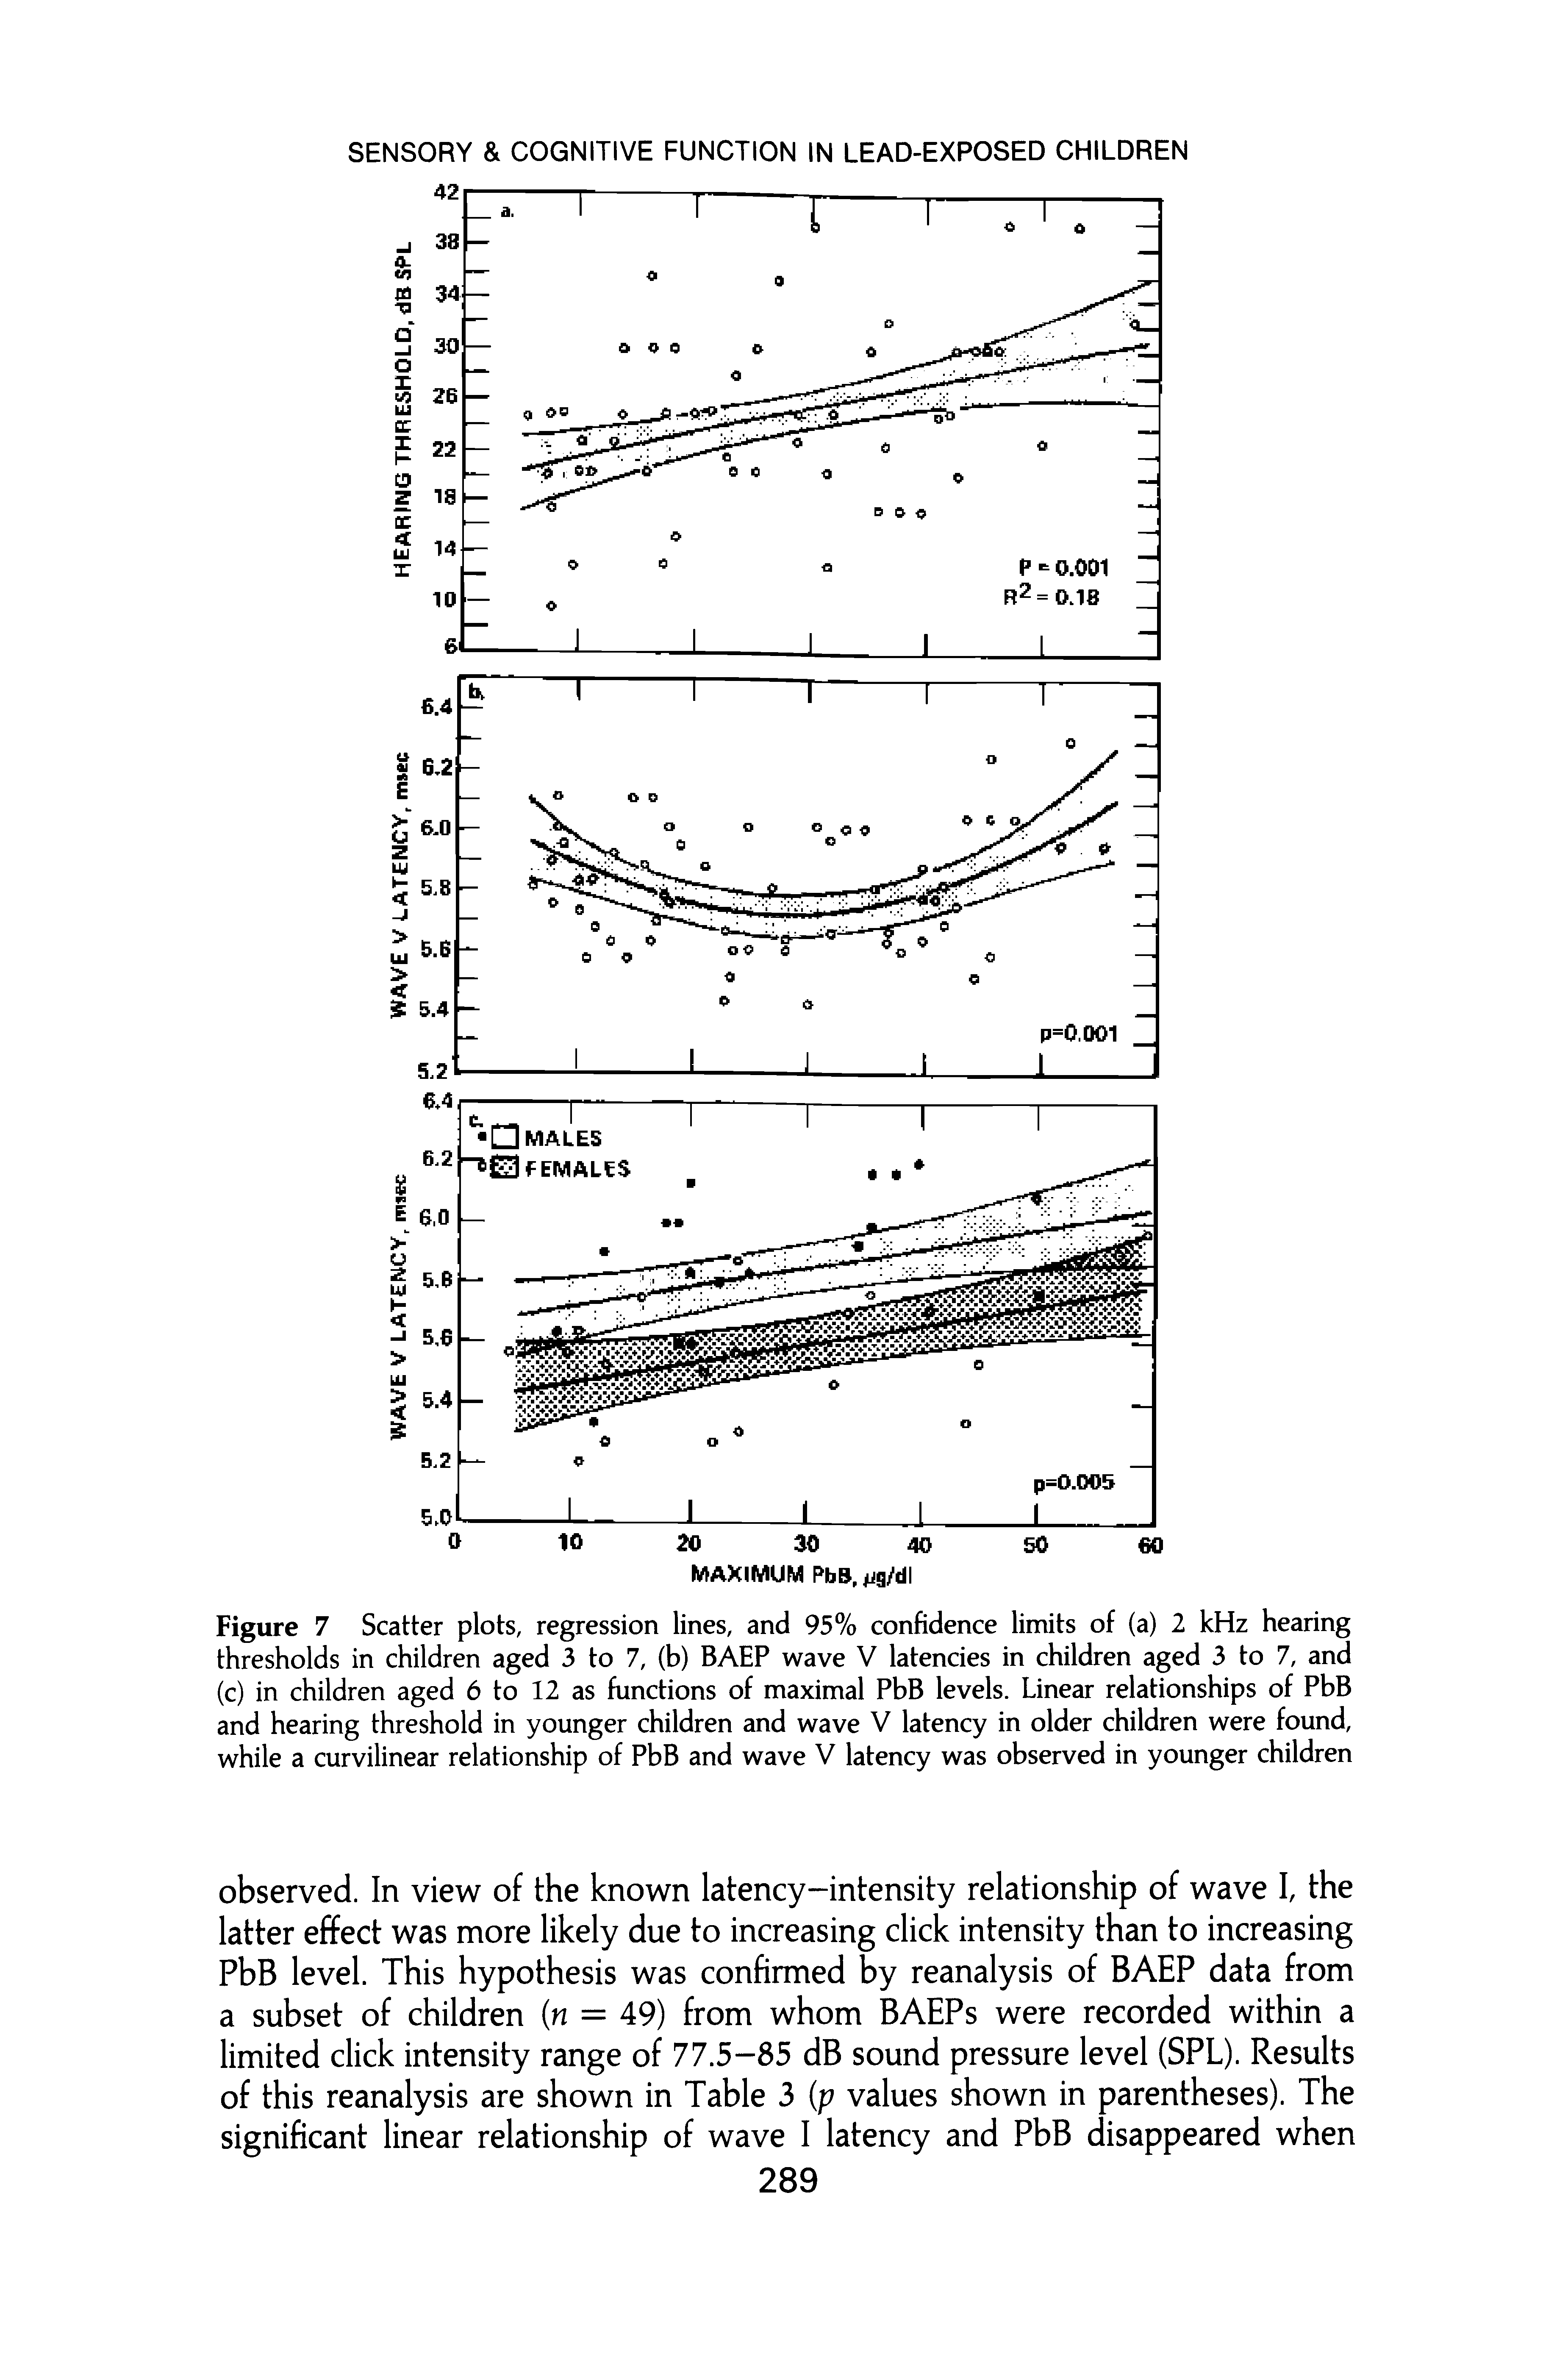 Figure 7 Scatter plots, regression lines, and 95% confidence limits of (a) 2 kHz hearing thresholds in children aged 3 to 7, (b) BAEP wave V latencies in children aged 3 to 7, and (c) in children aged 6 to 12 as functions of maximal PbB levels. Linear relationships of PbB and hearing threshold in younger children and wave V latency in older children were found, while a curvilinear relationship of PbB and wave V latency was observed in younger children...